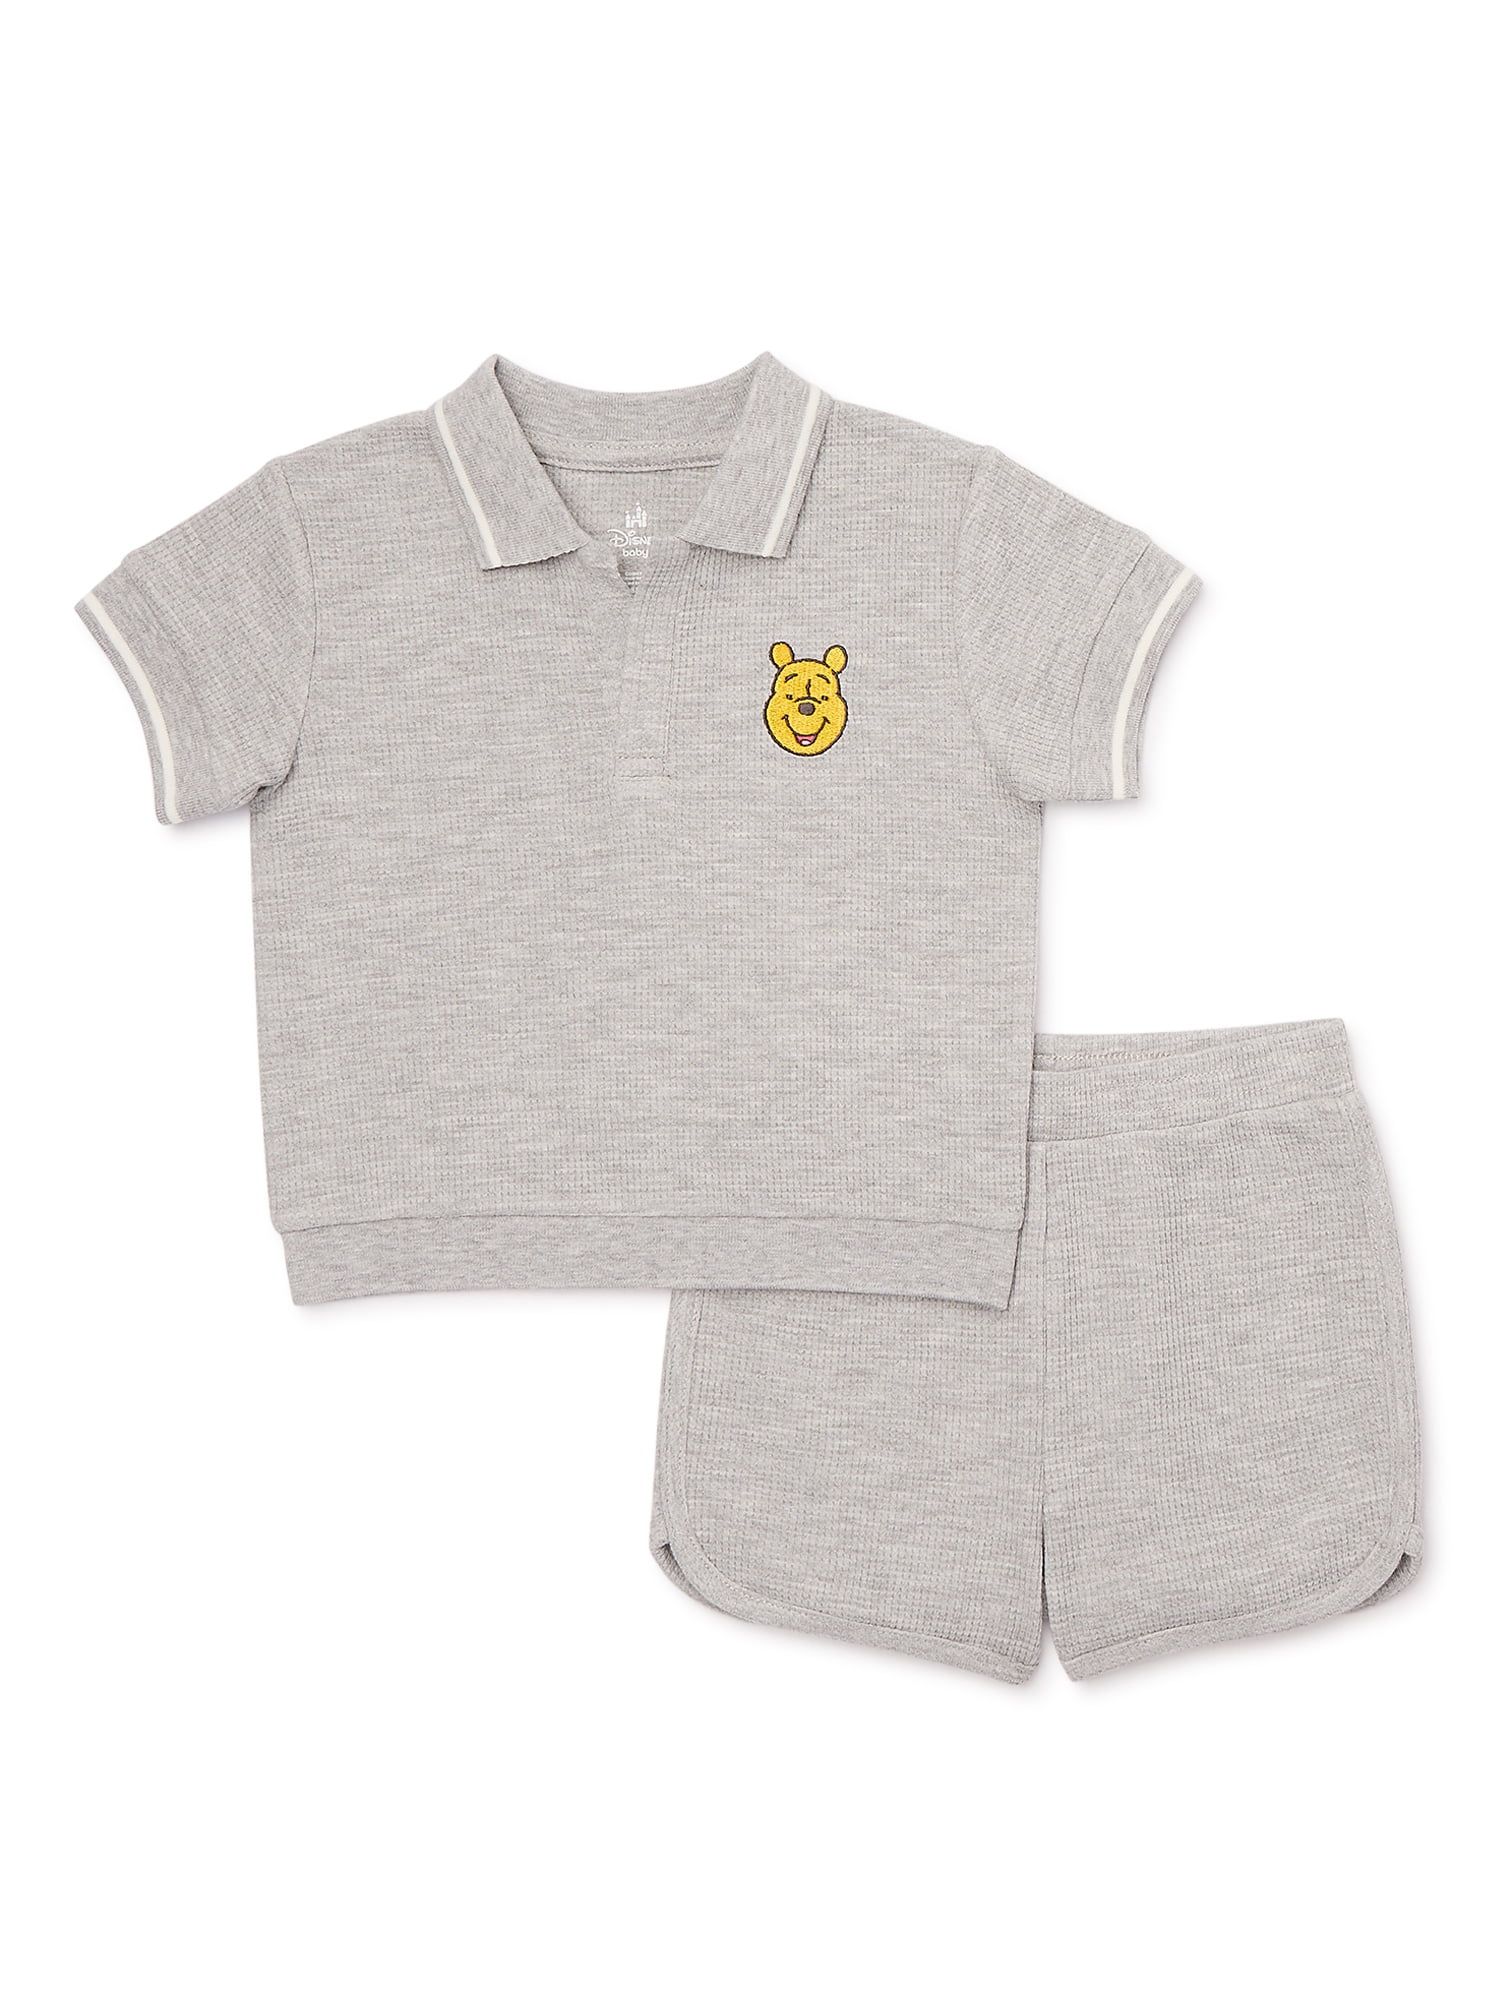 Winnie the Pooh Baby Polo Shirt and Shorts Set, 2-Piece, Sizes 0M-18M | Walmart (US)